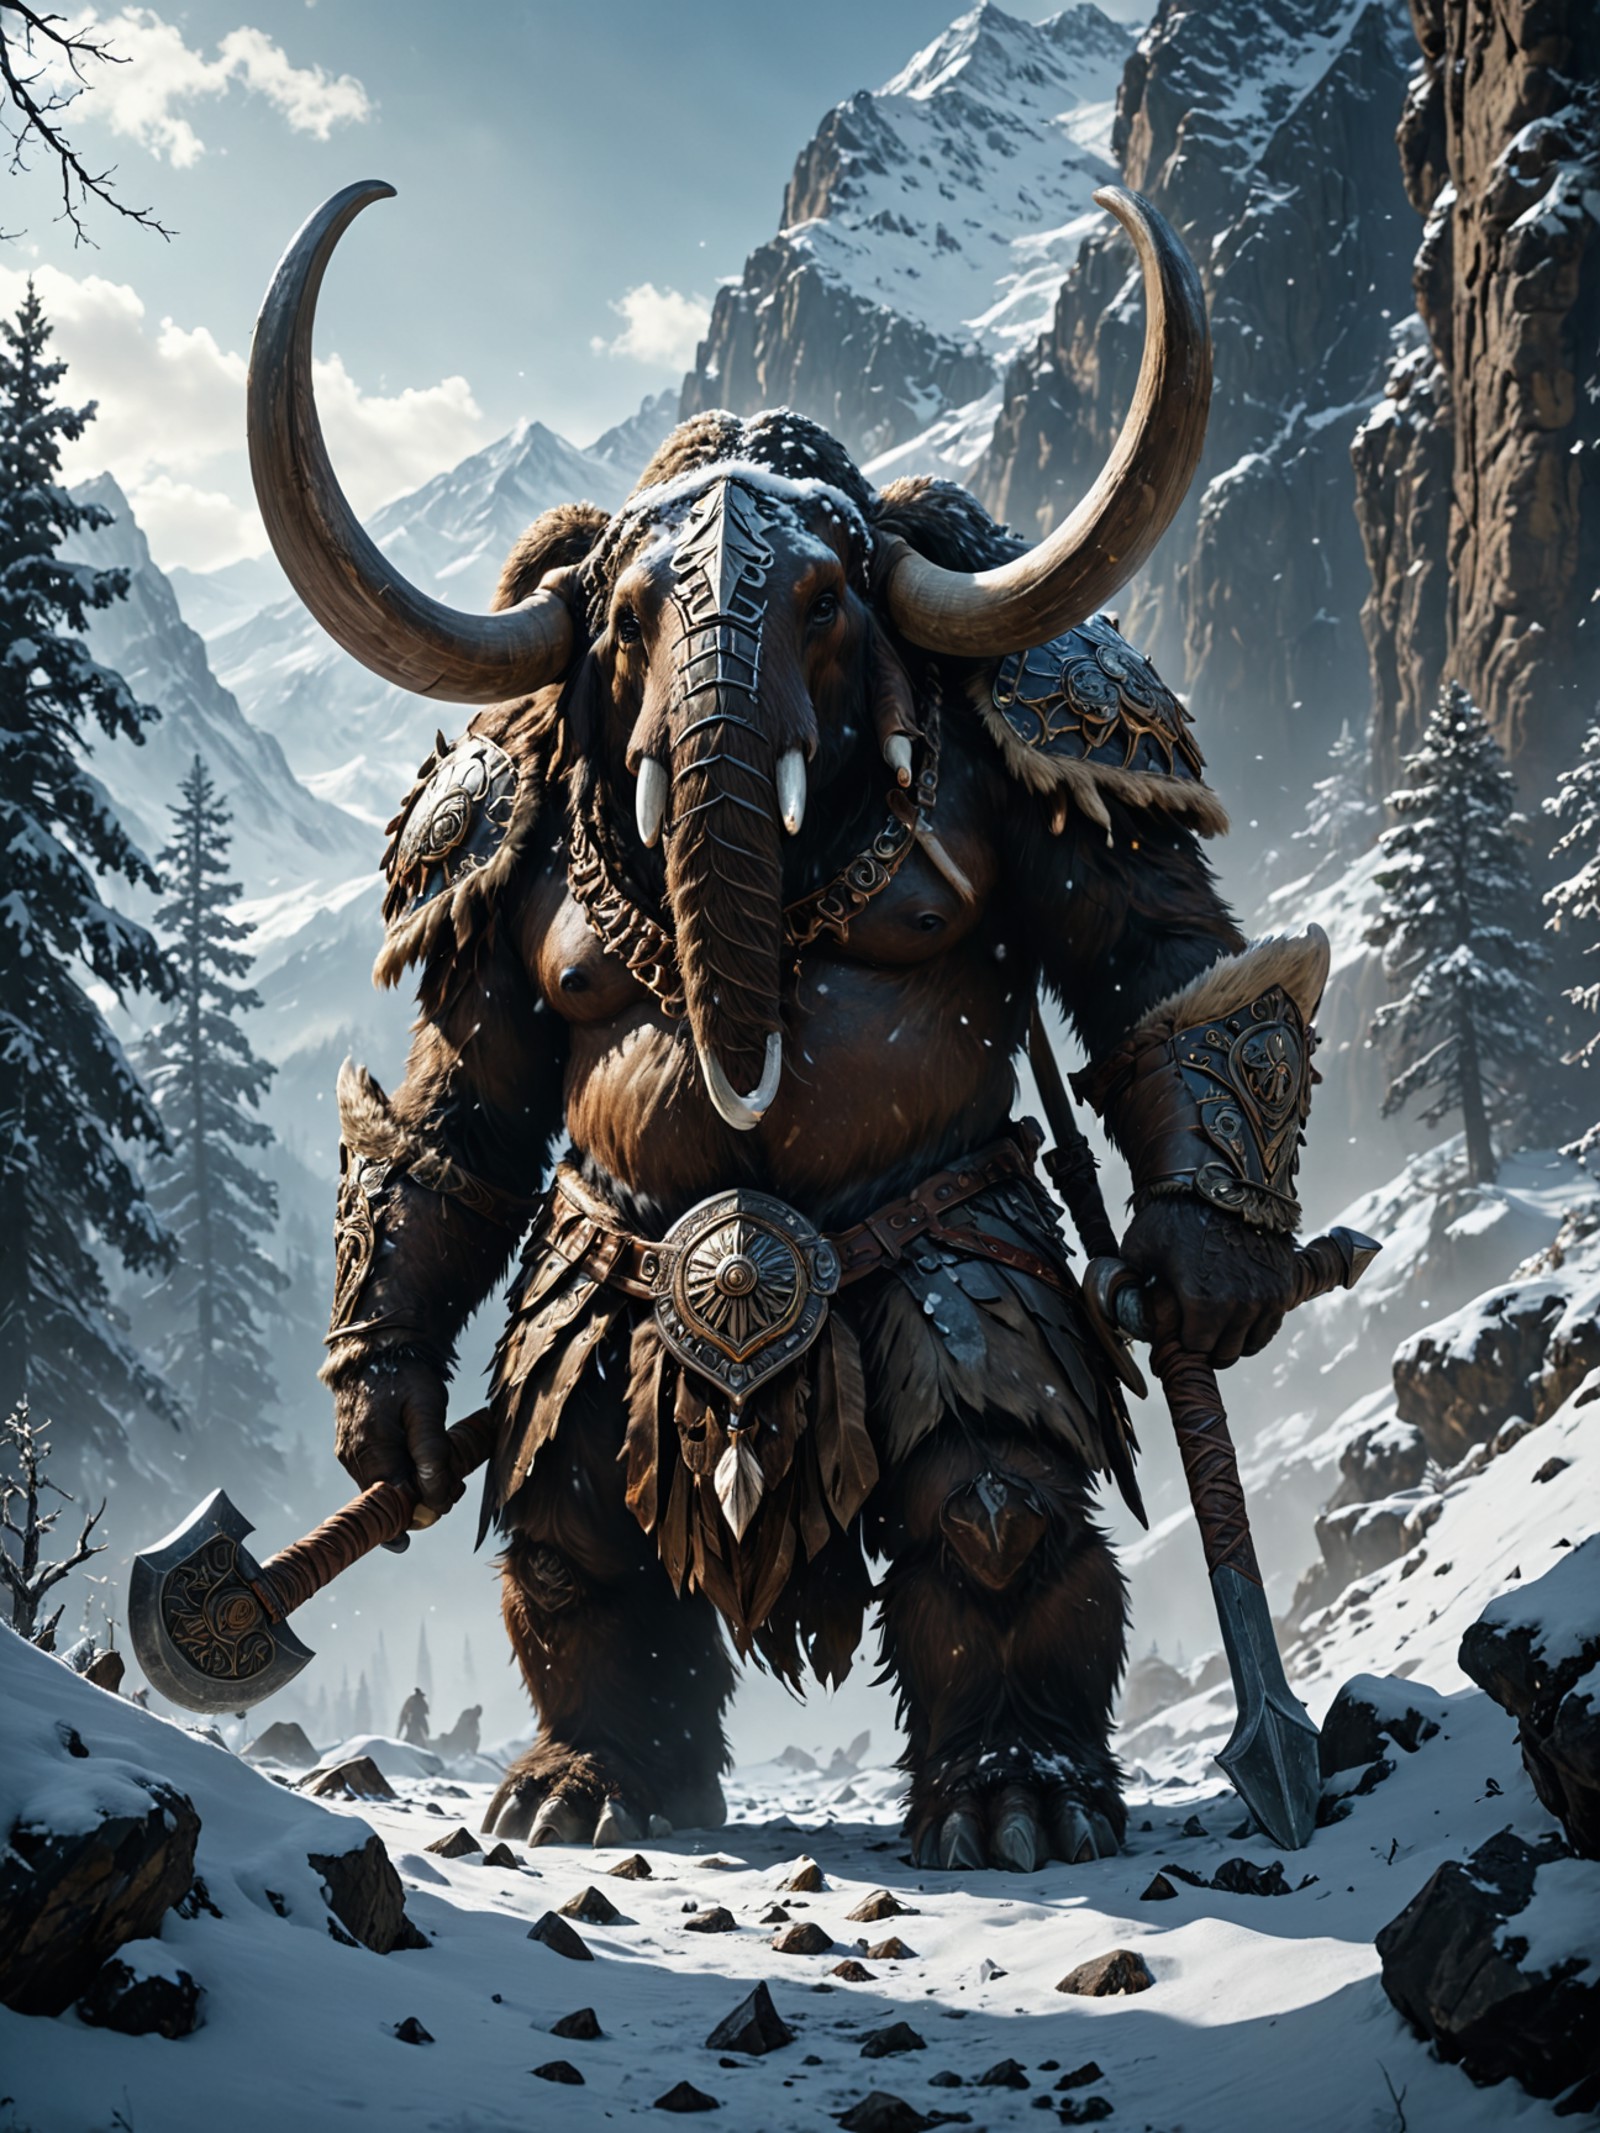 highly detailed and dramatic scene, a towering fluffy mammoth warrior in a snowy mountain, DnD style, the mammoth warrior ...